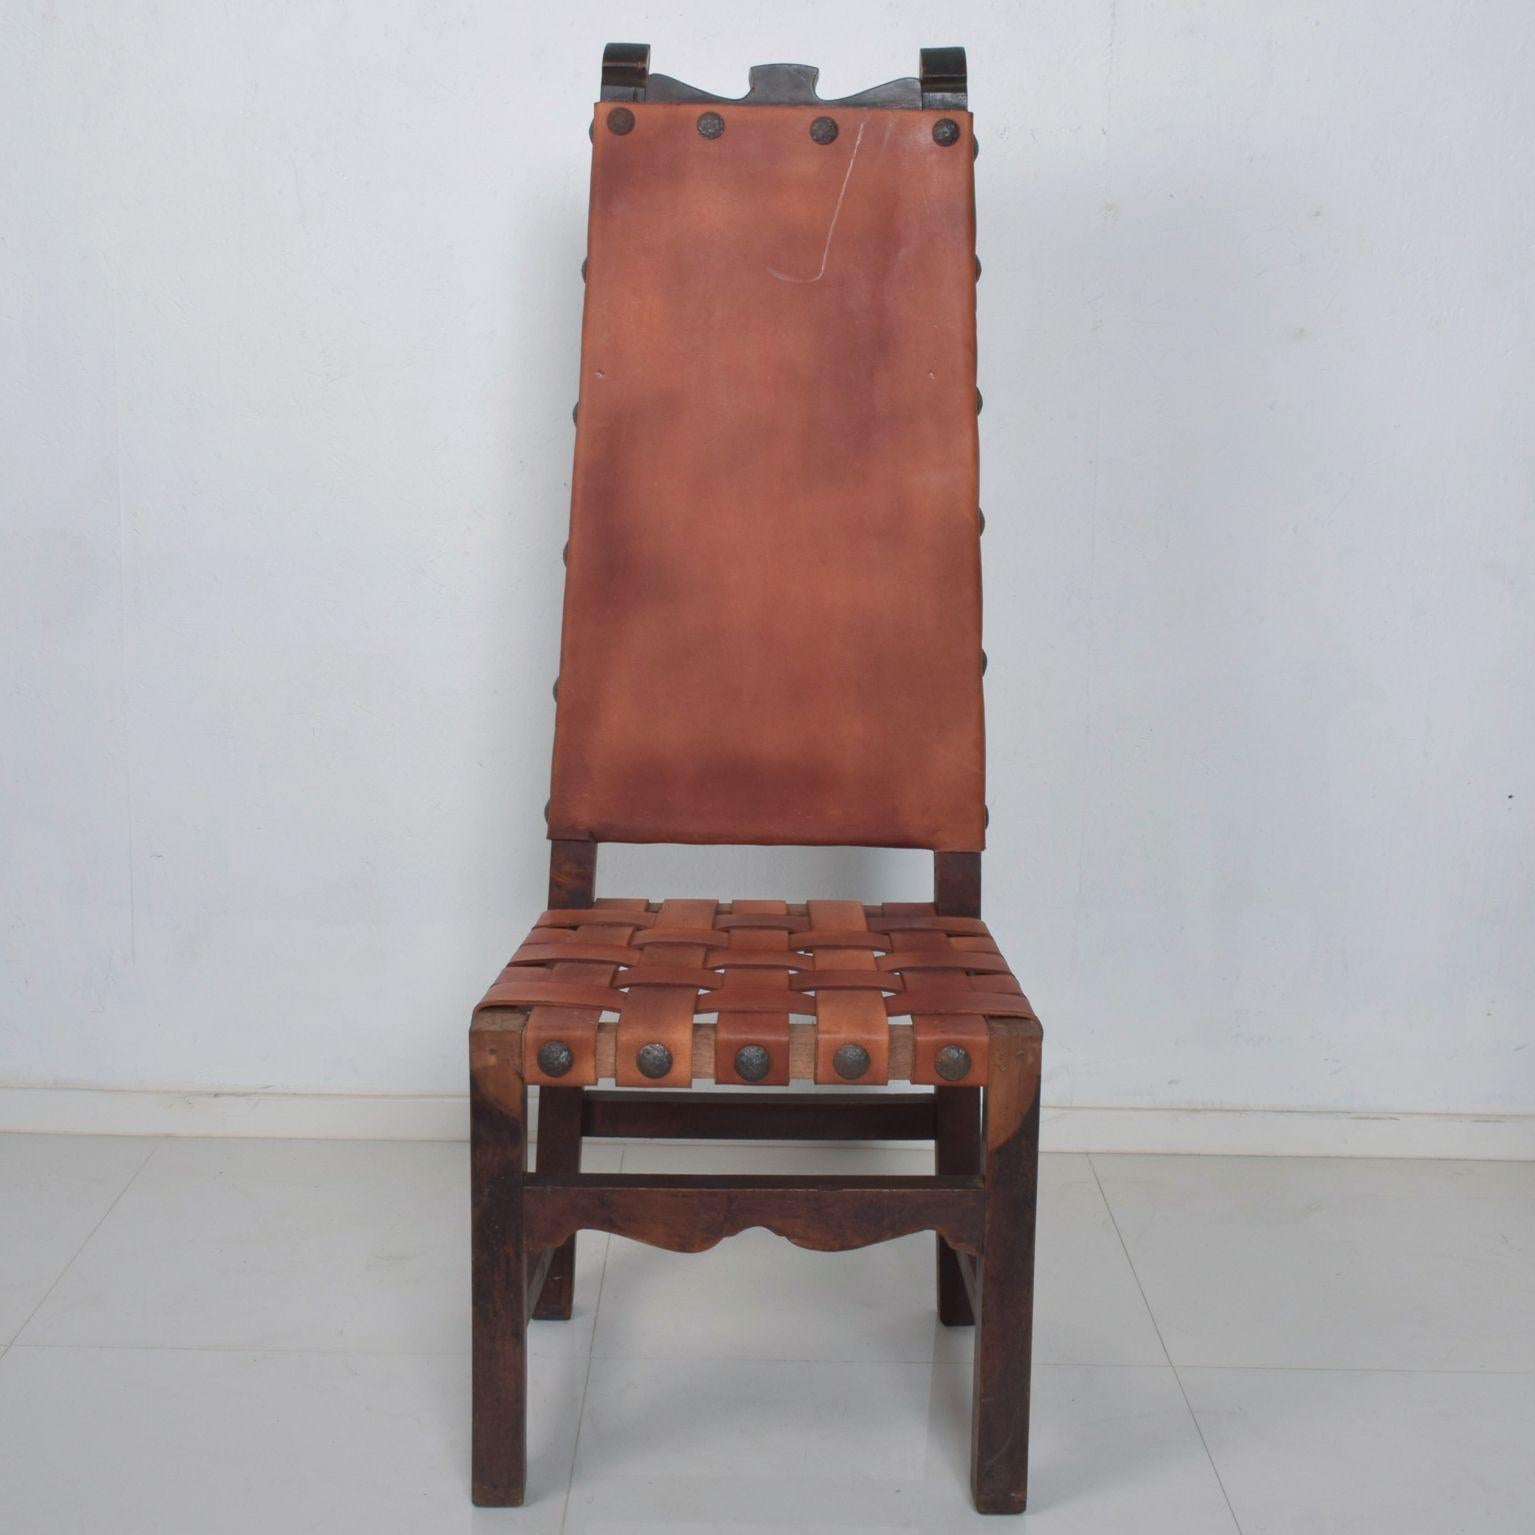 Mid-20th Century SPANISH Colonial TALL Wood Chairs Woven Saddle Leather style Luis BARRAGAN